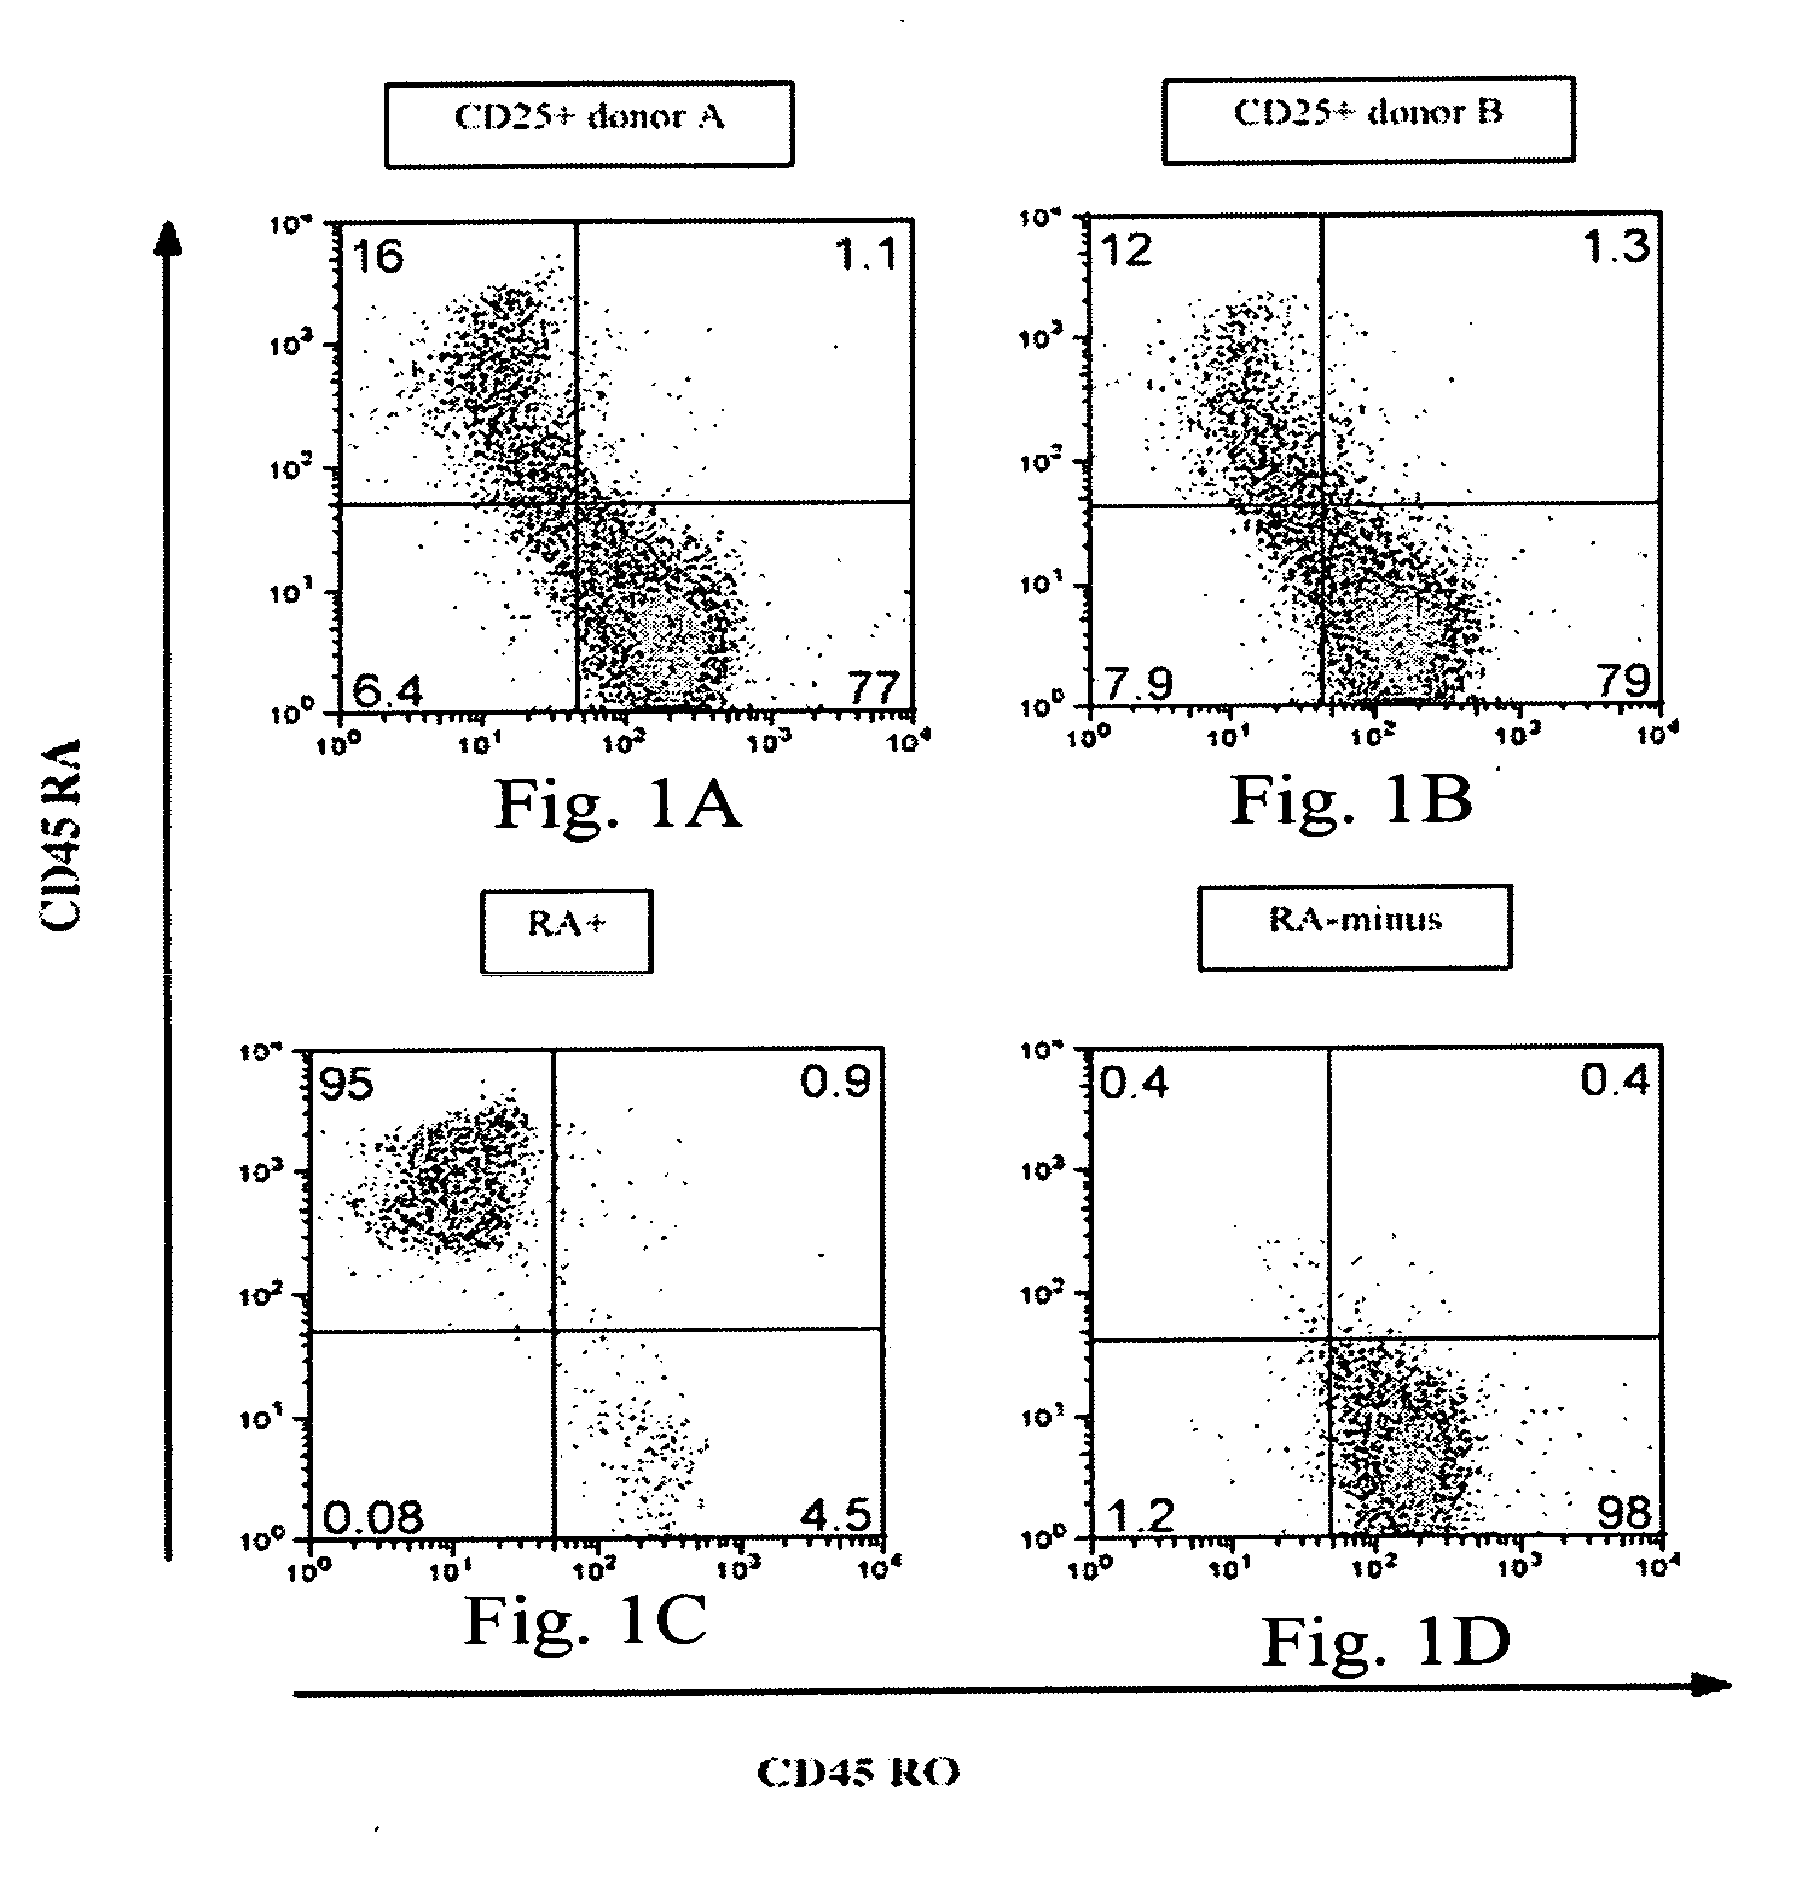 Methods for the Isolation and Expansion of Cord Blood Derived T Regulatory Cells